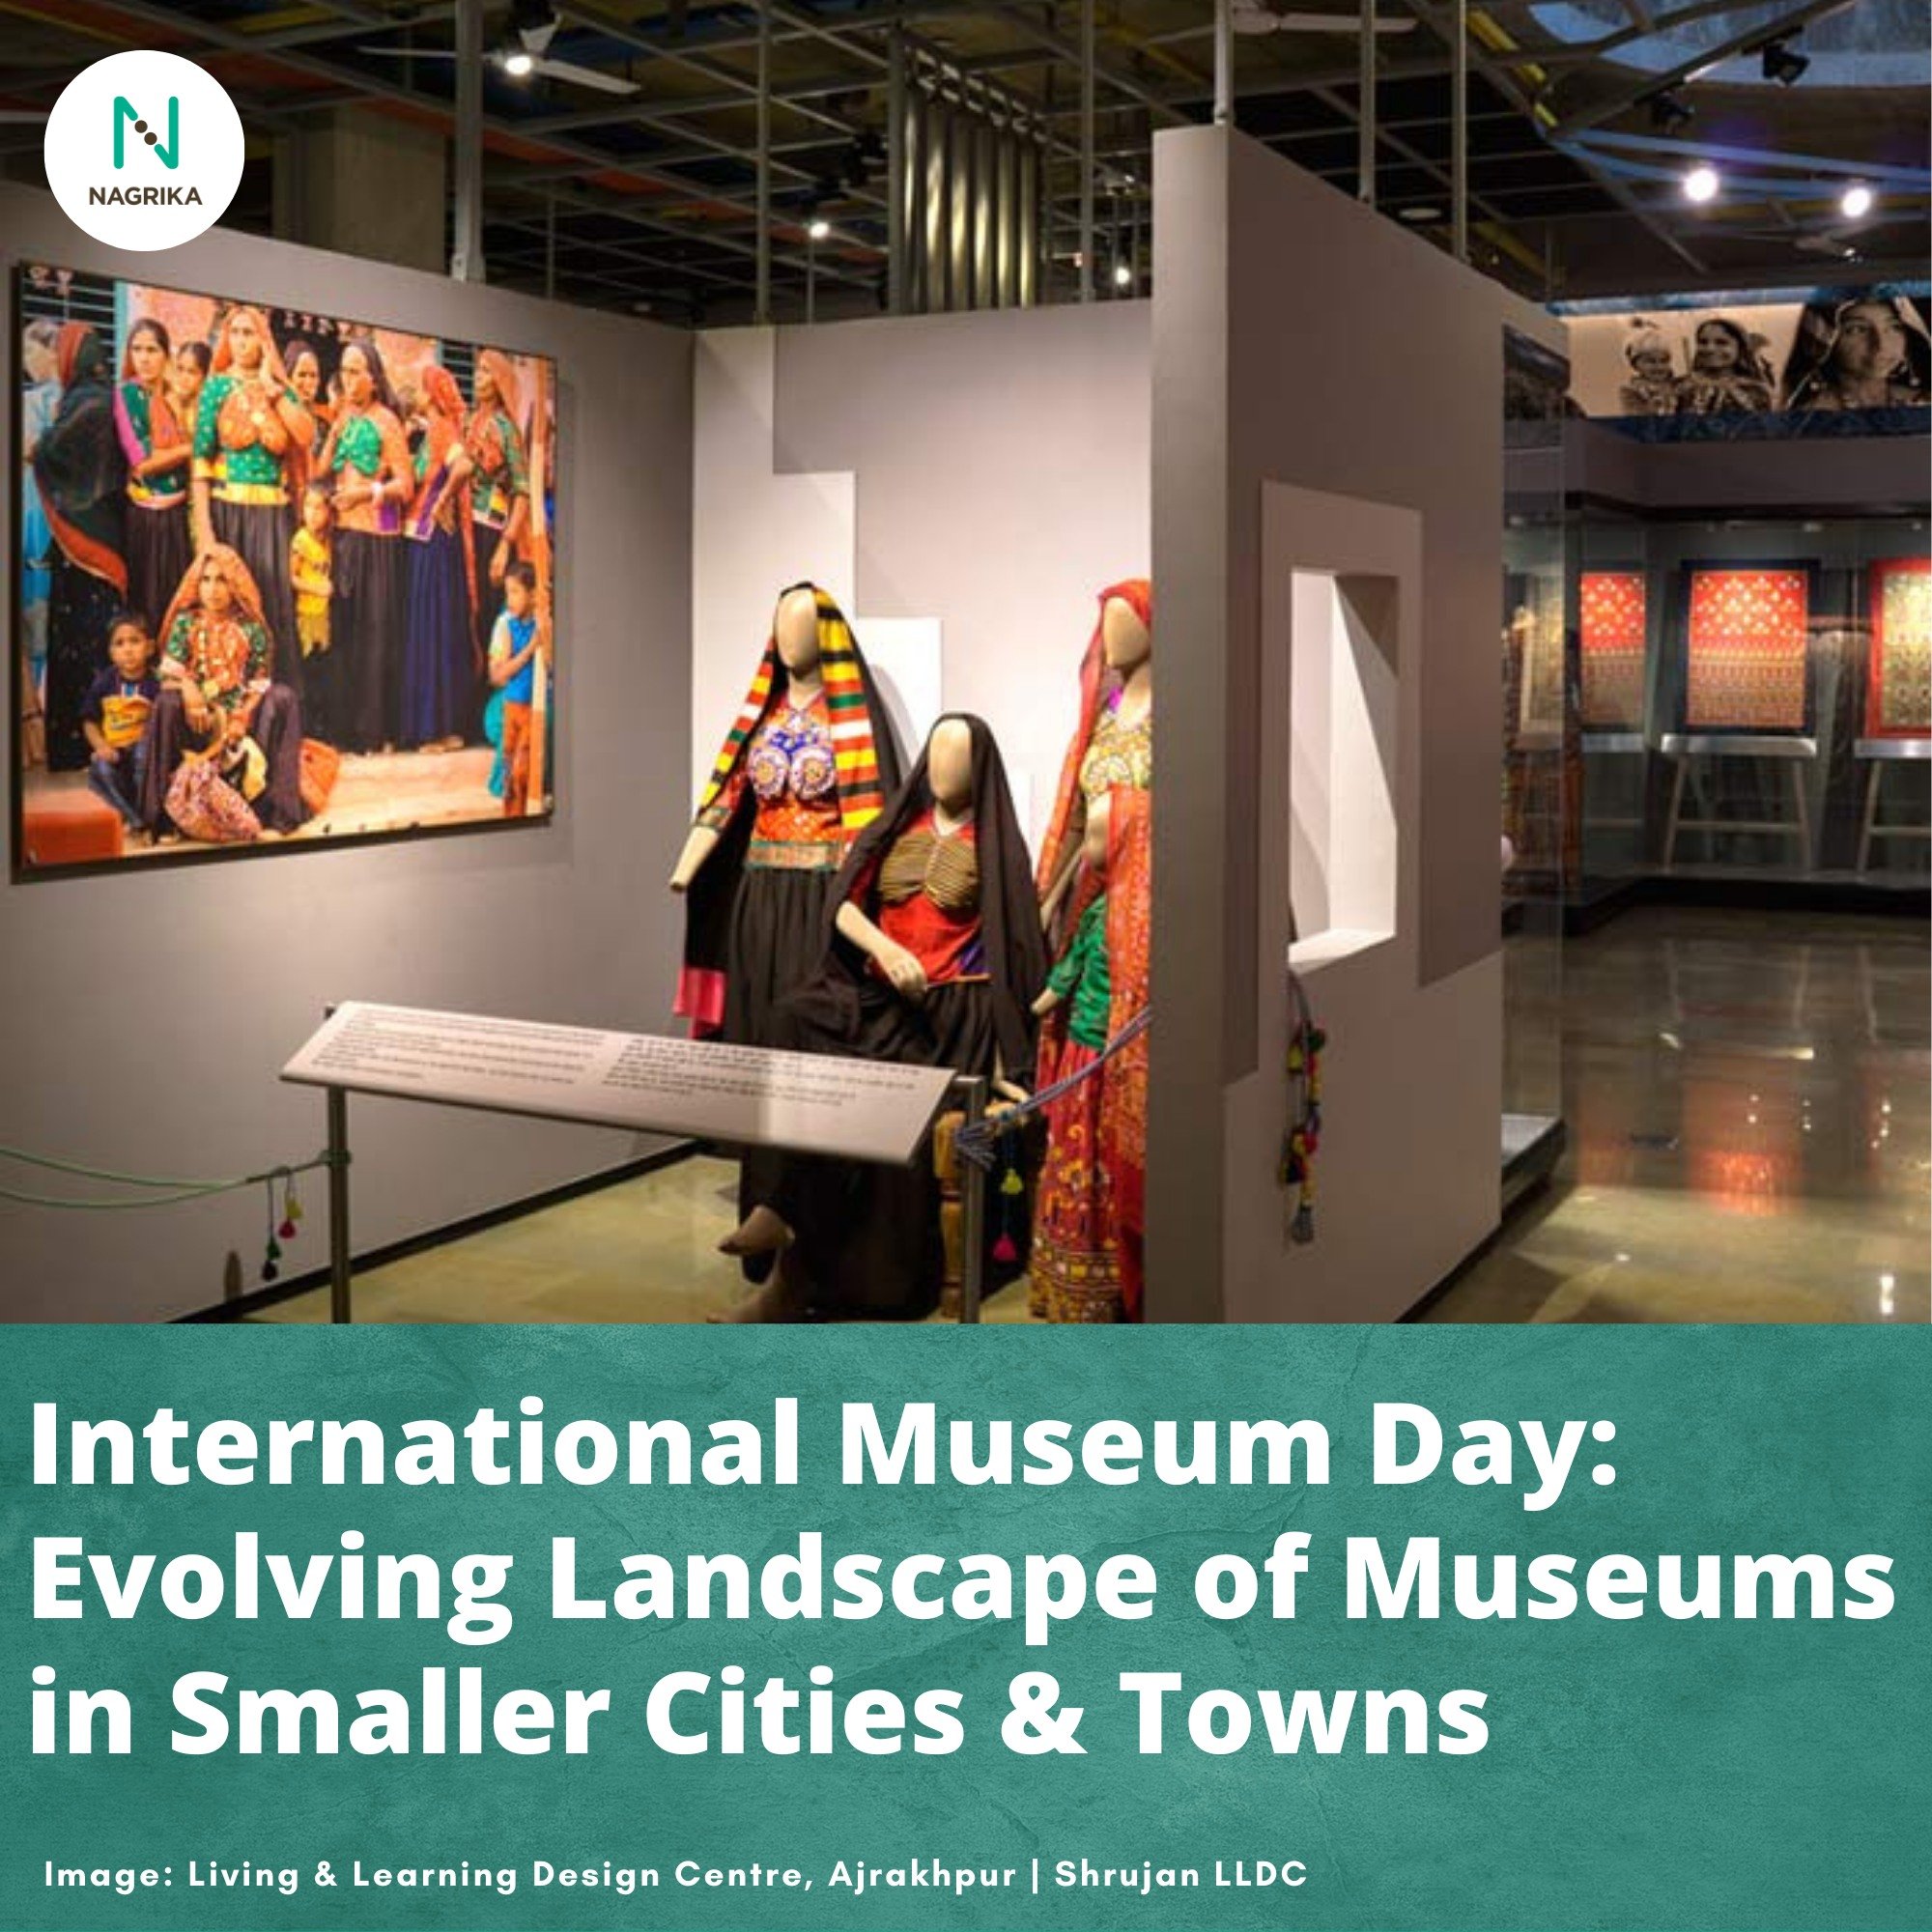 &ldquo;Real museums are places where Time is transformed into Space&rdquo; - Orhan Pamuk
Originating as repositories of colonial remnants, #Museums have now evolved into spaces of social interaction &amp; #culturaleducation. India&rsquo;s museum land